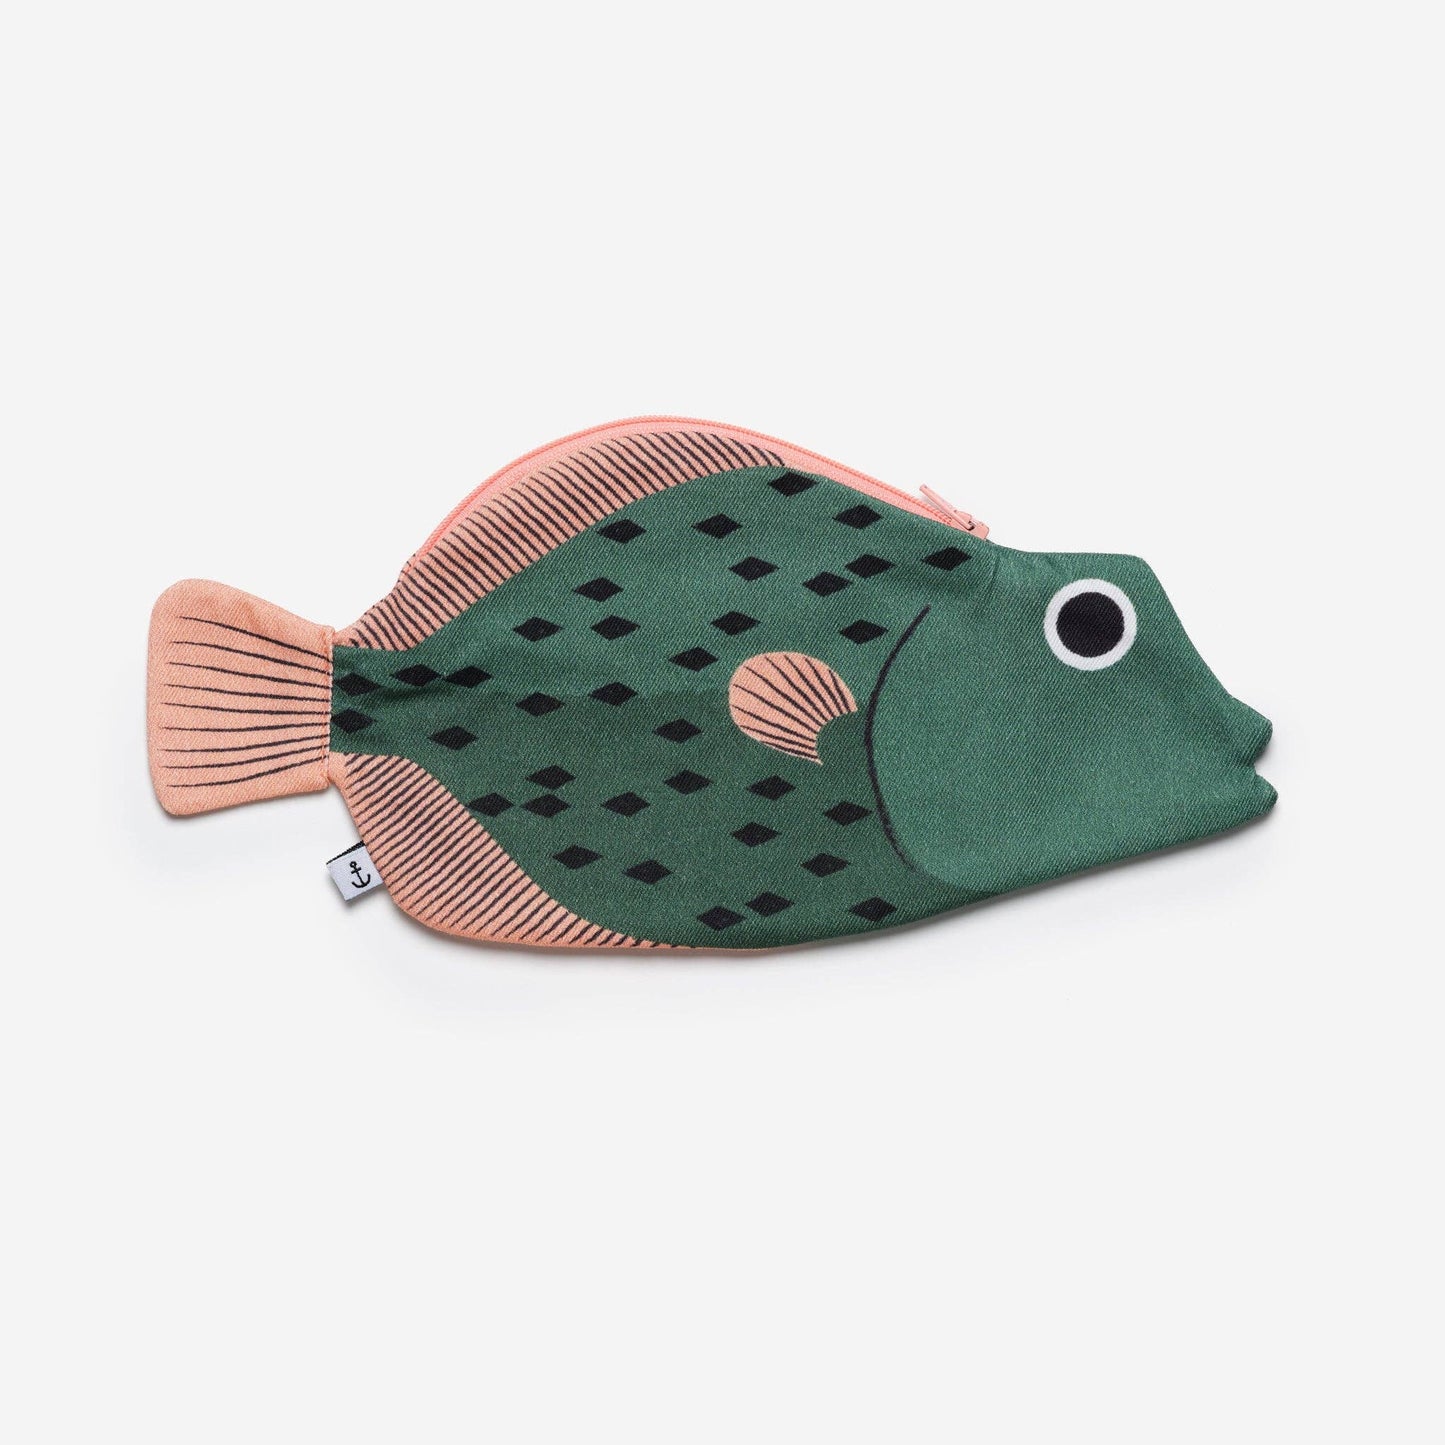 Oreo Fish zippered pouch --- body is dark green with black speckled detail, fins are pink 